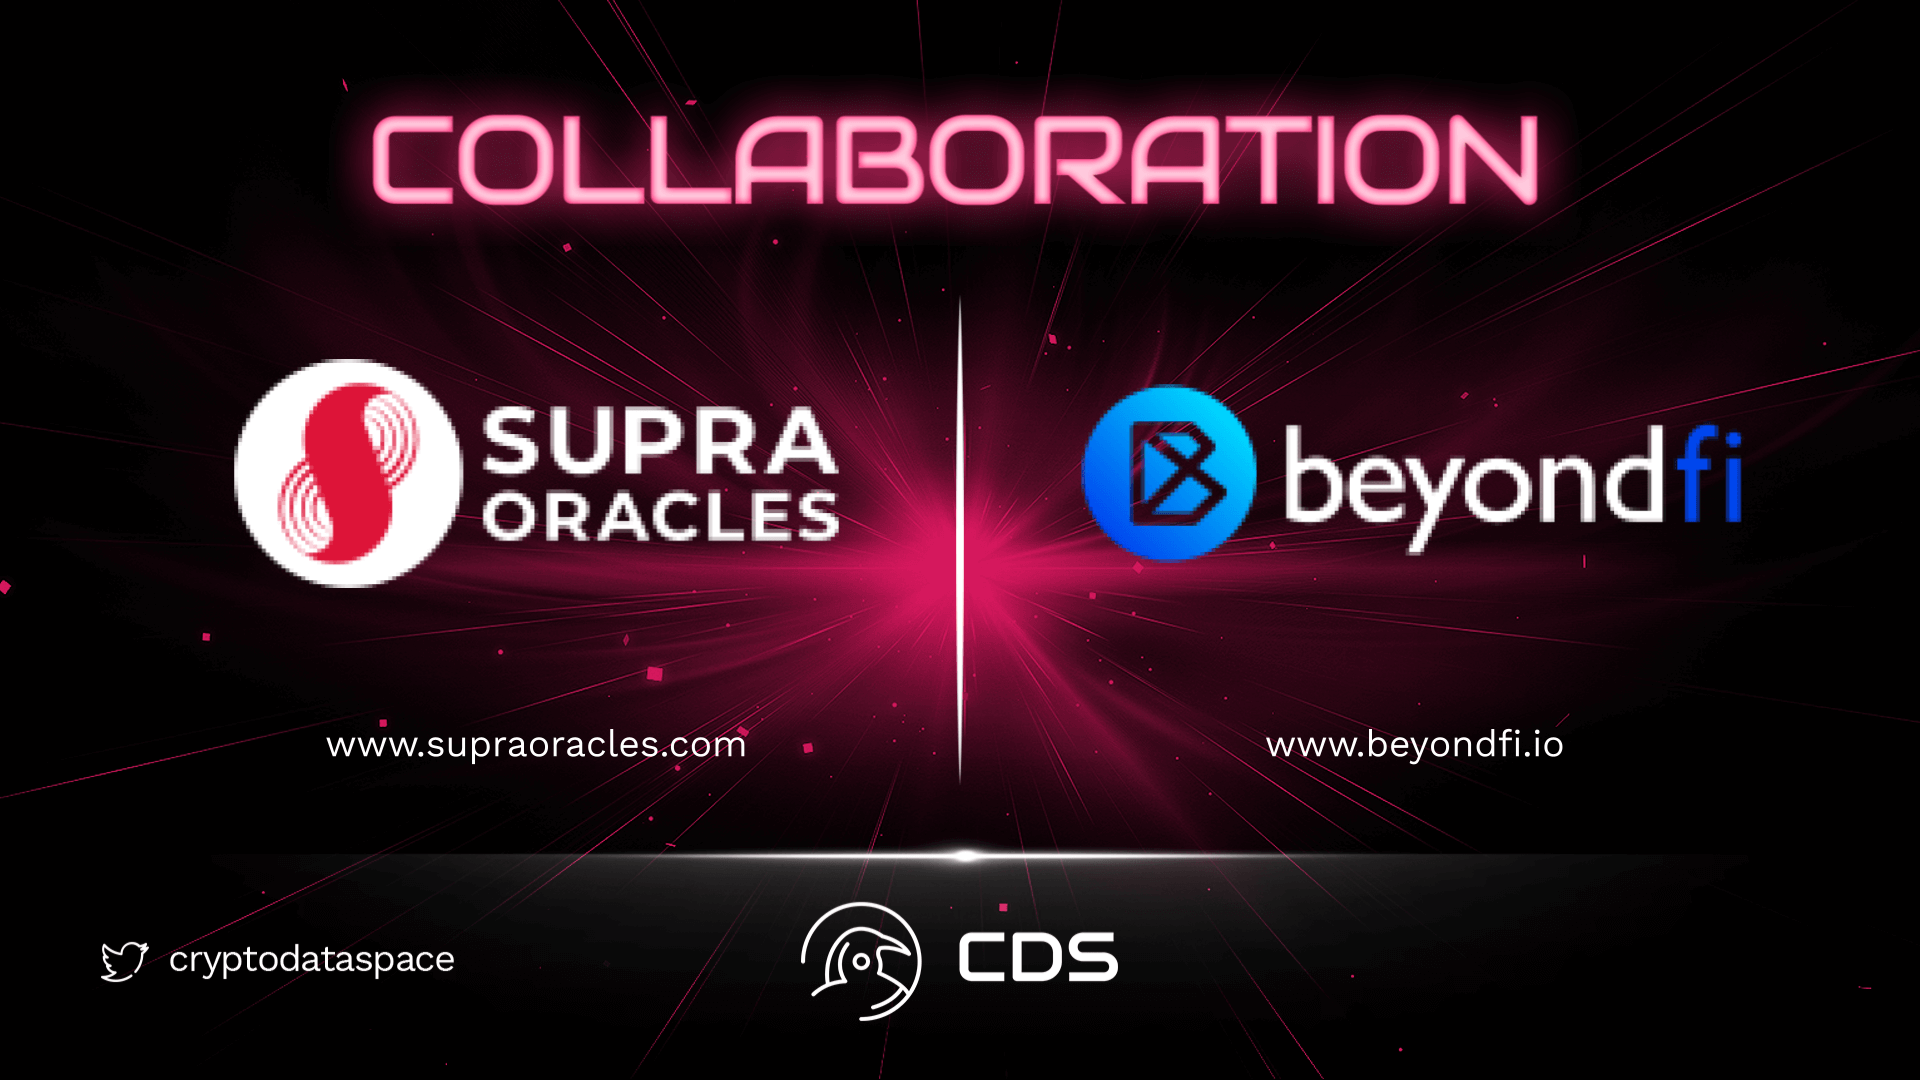 Supraoracles collaboration with Beyondfi